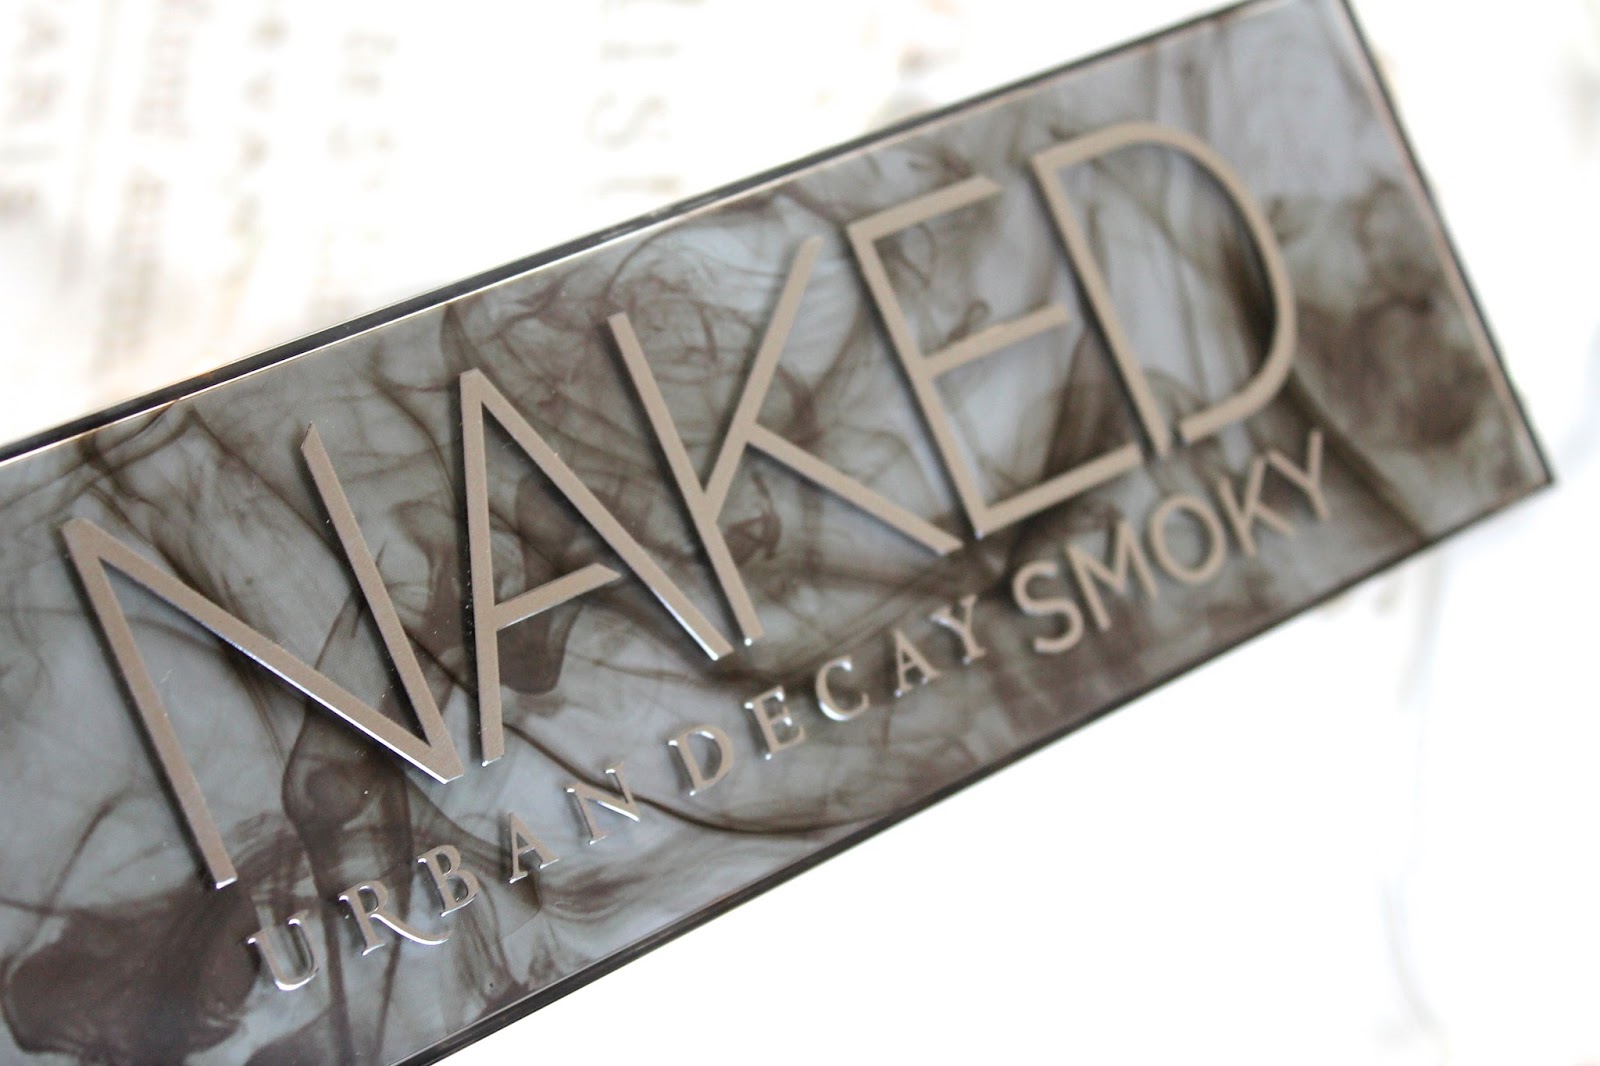 Urban Decay Naked Smoky blog review